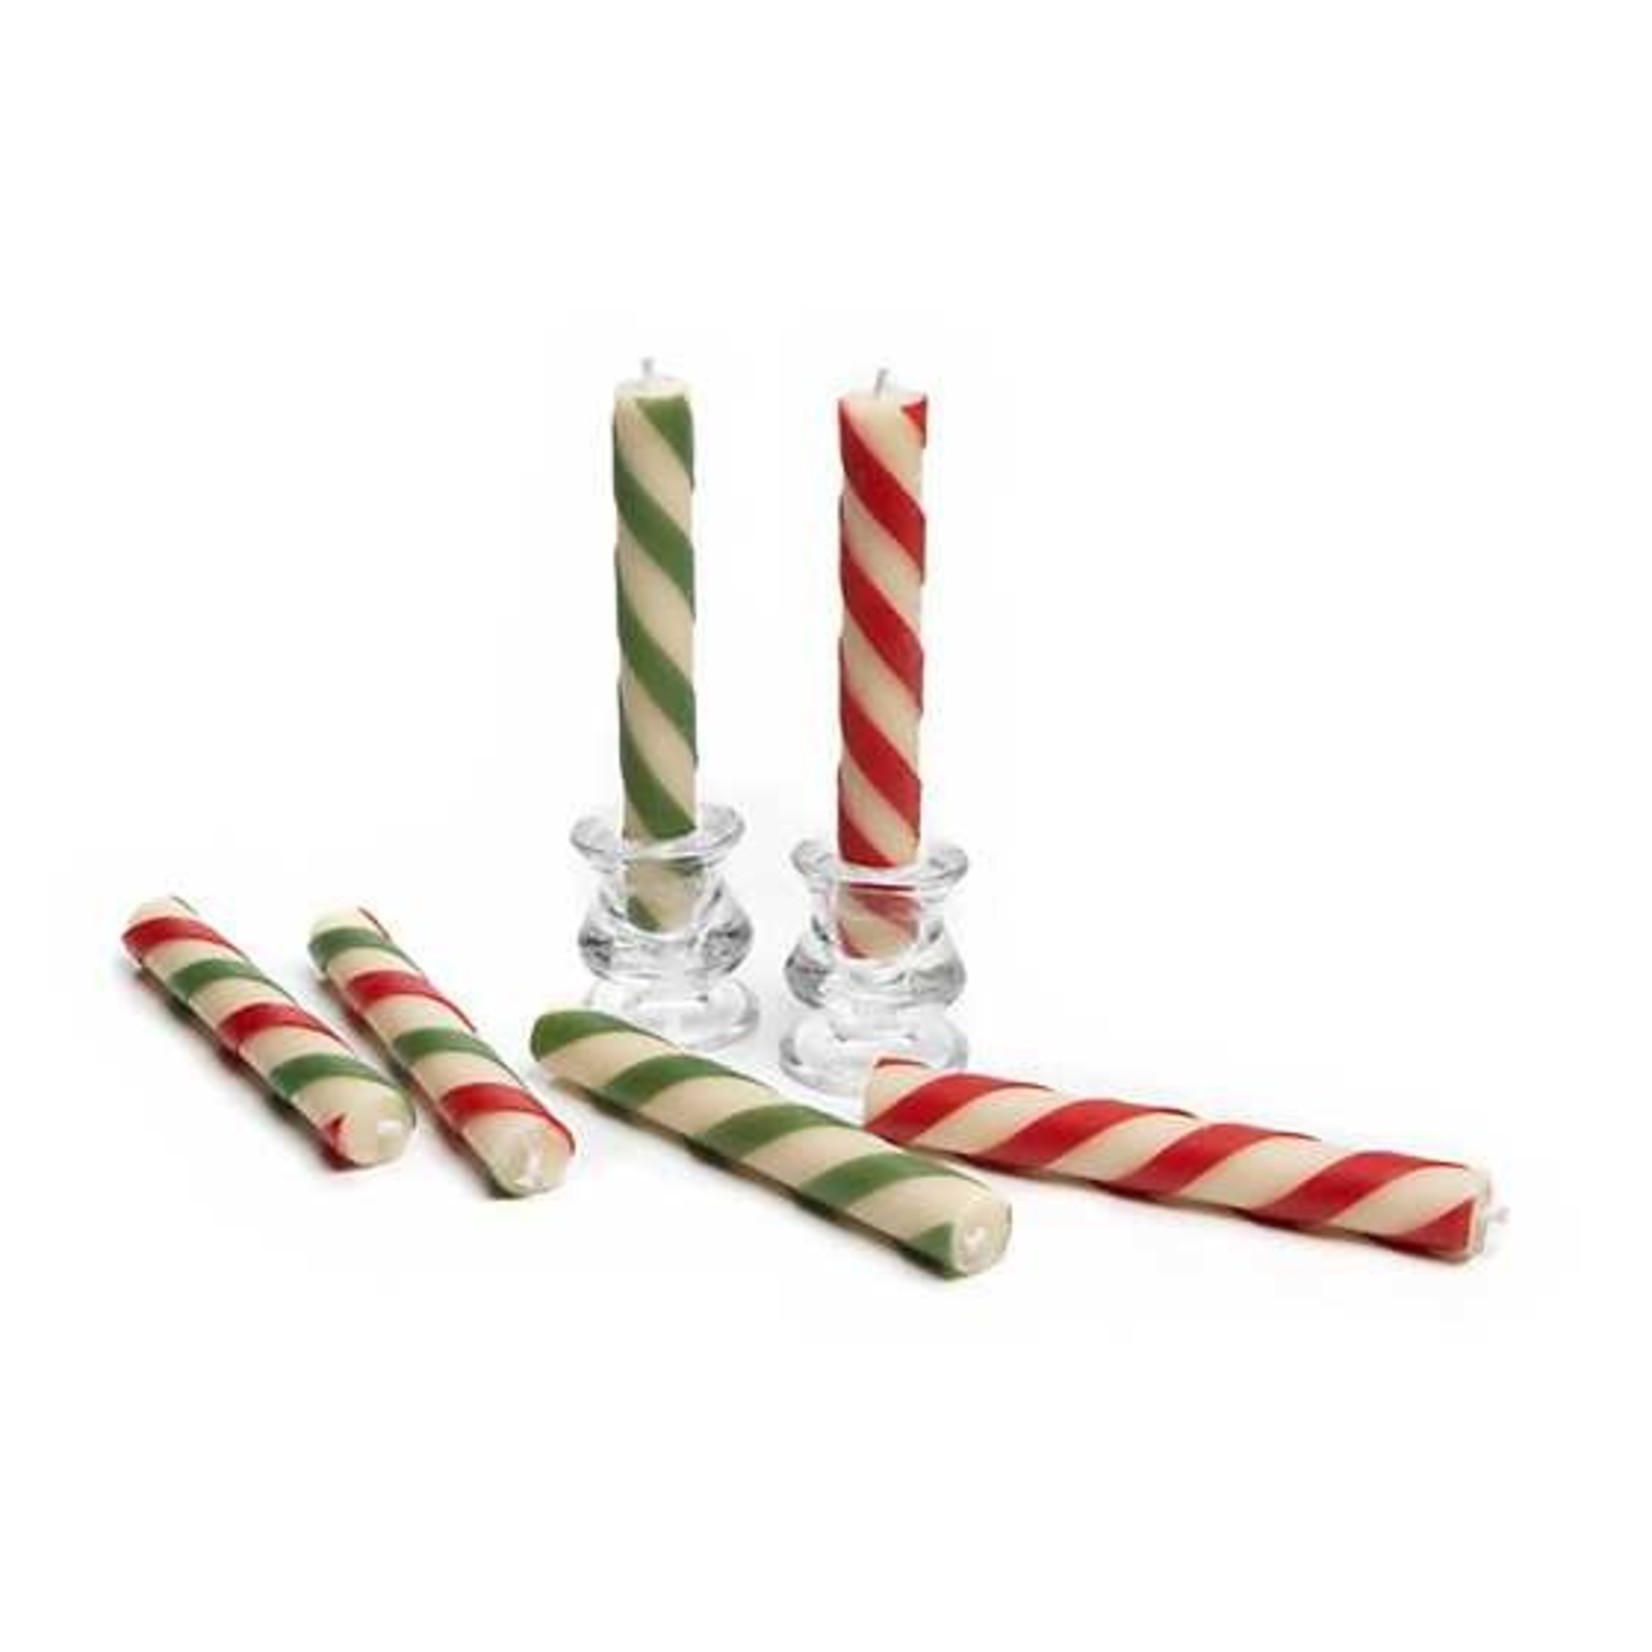 MacKenzie Childs Mini Dinner Candles - Candy Cane - Set of 6